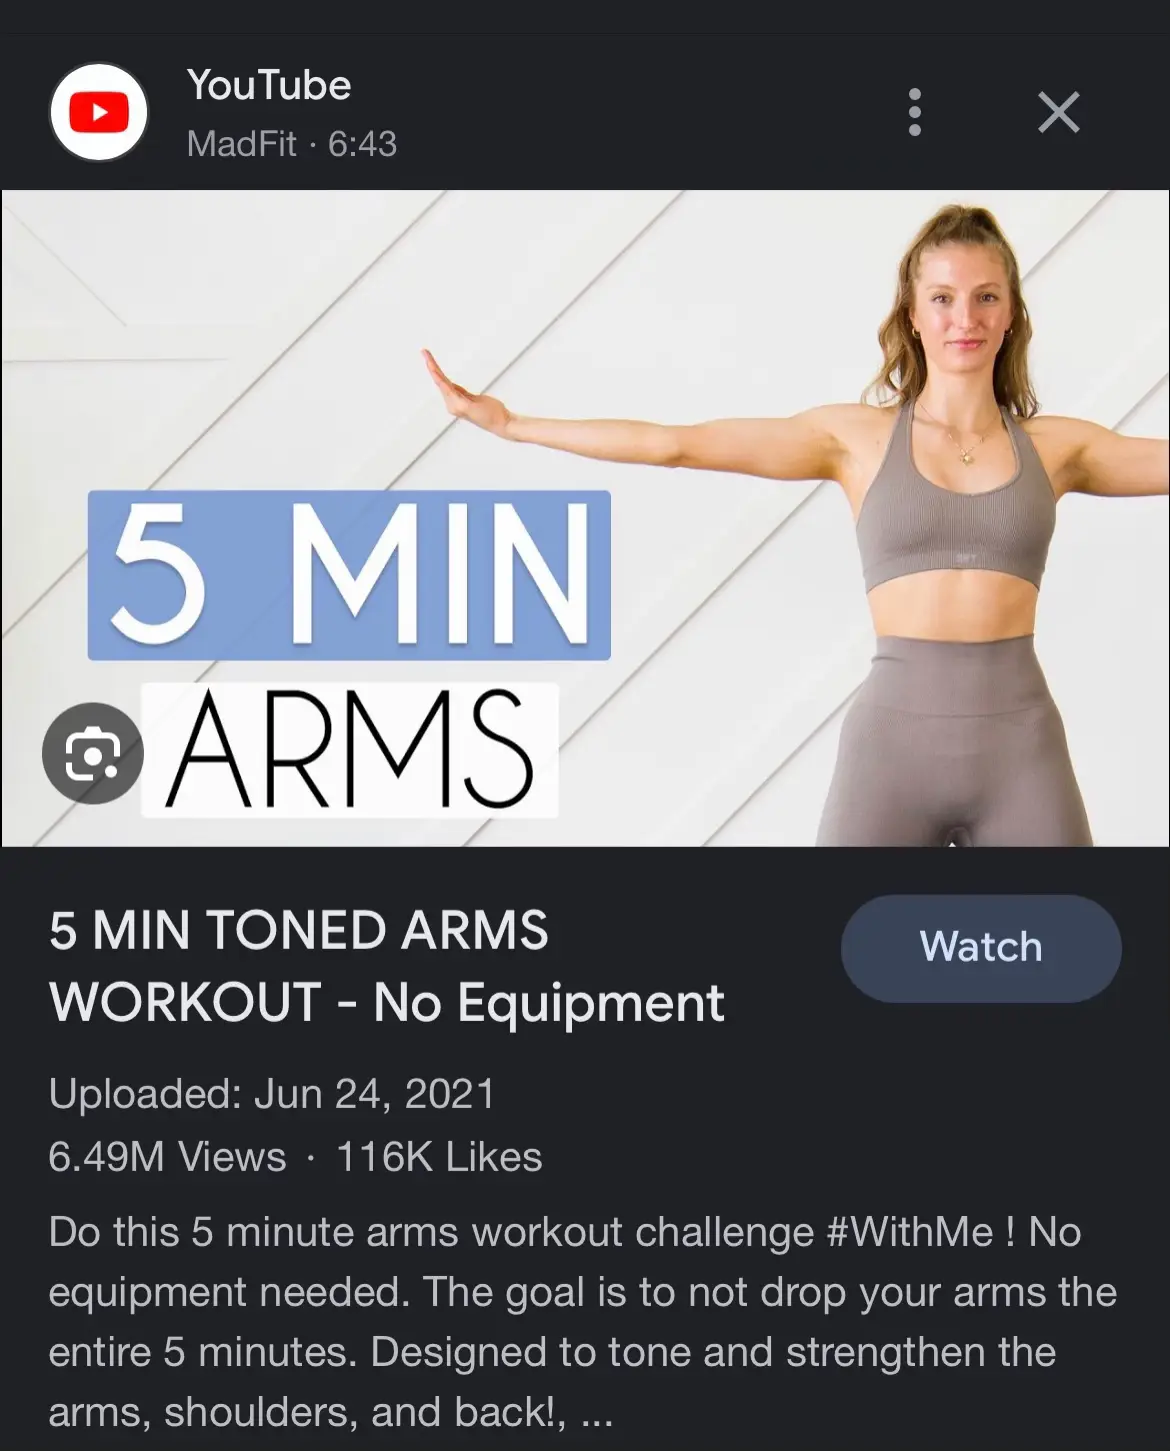 5 MINUTES TONED ARMS WORKOUT, no equipment